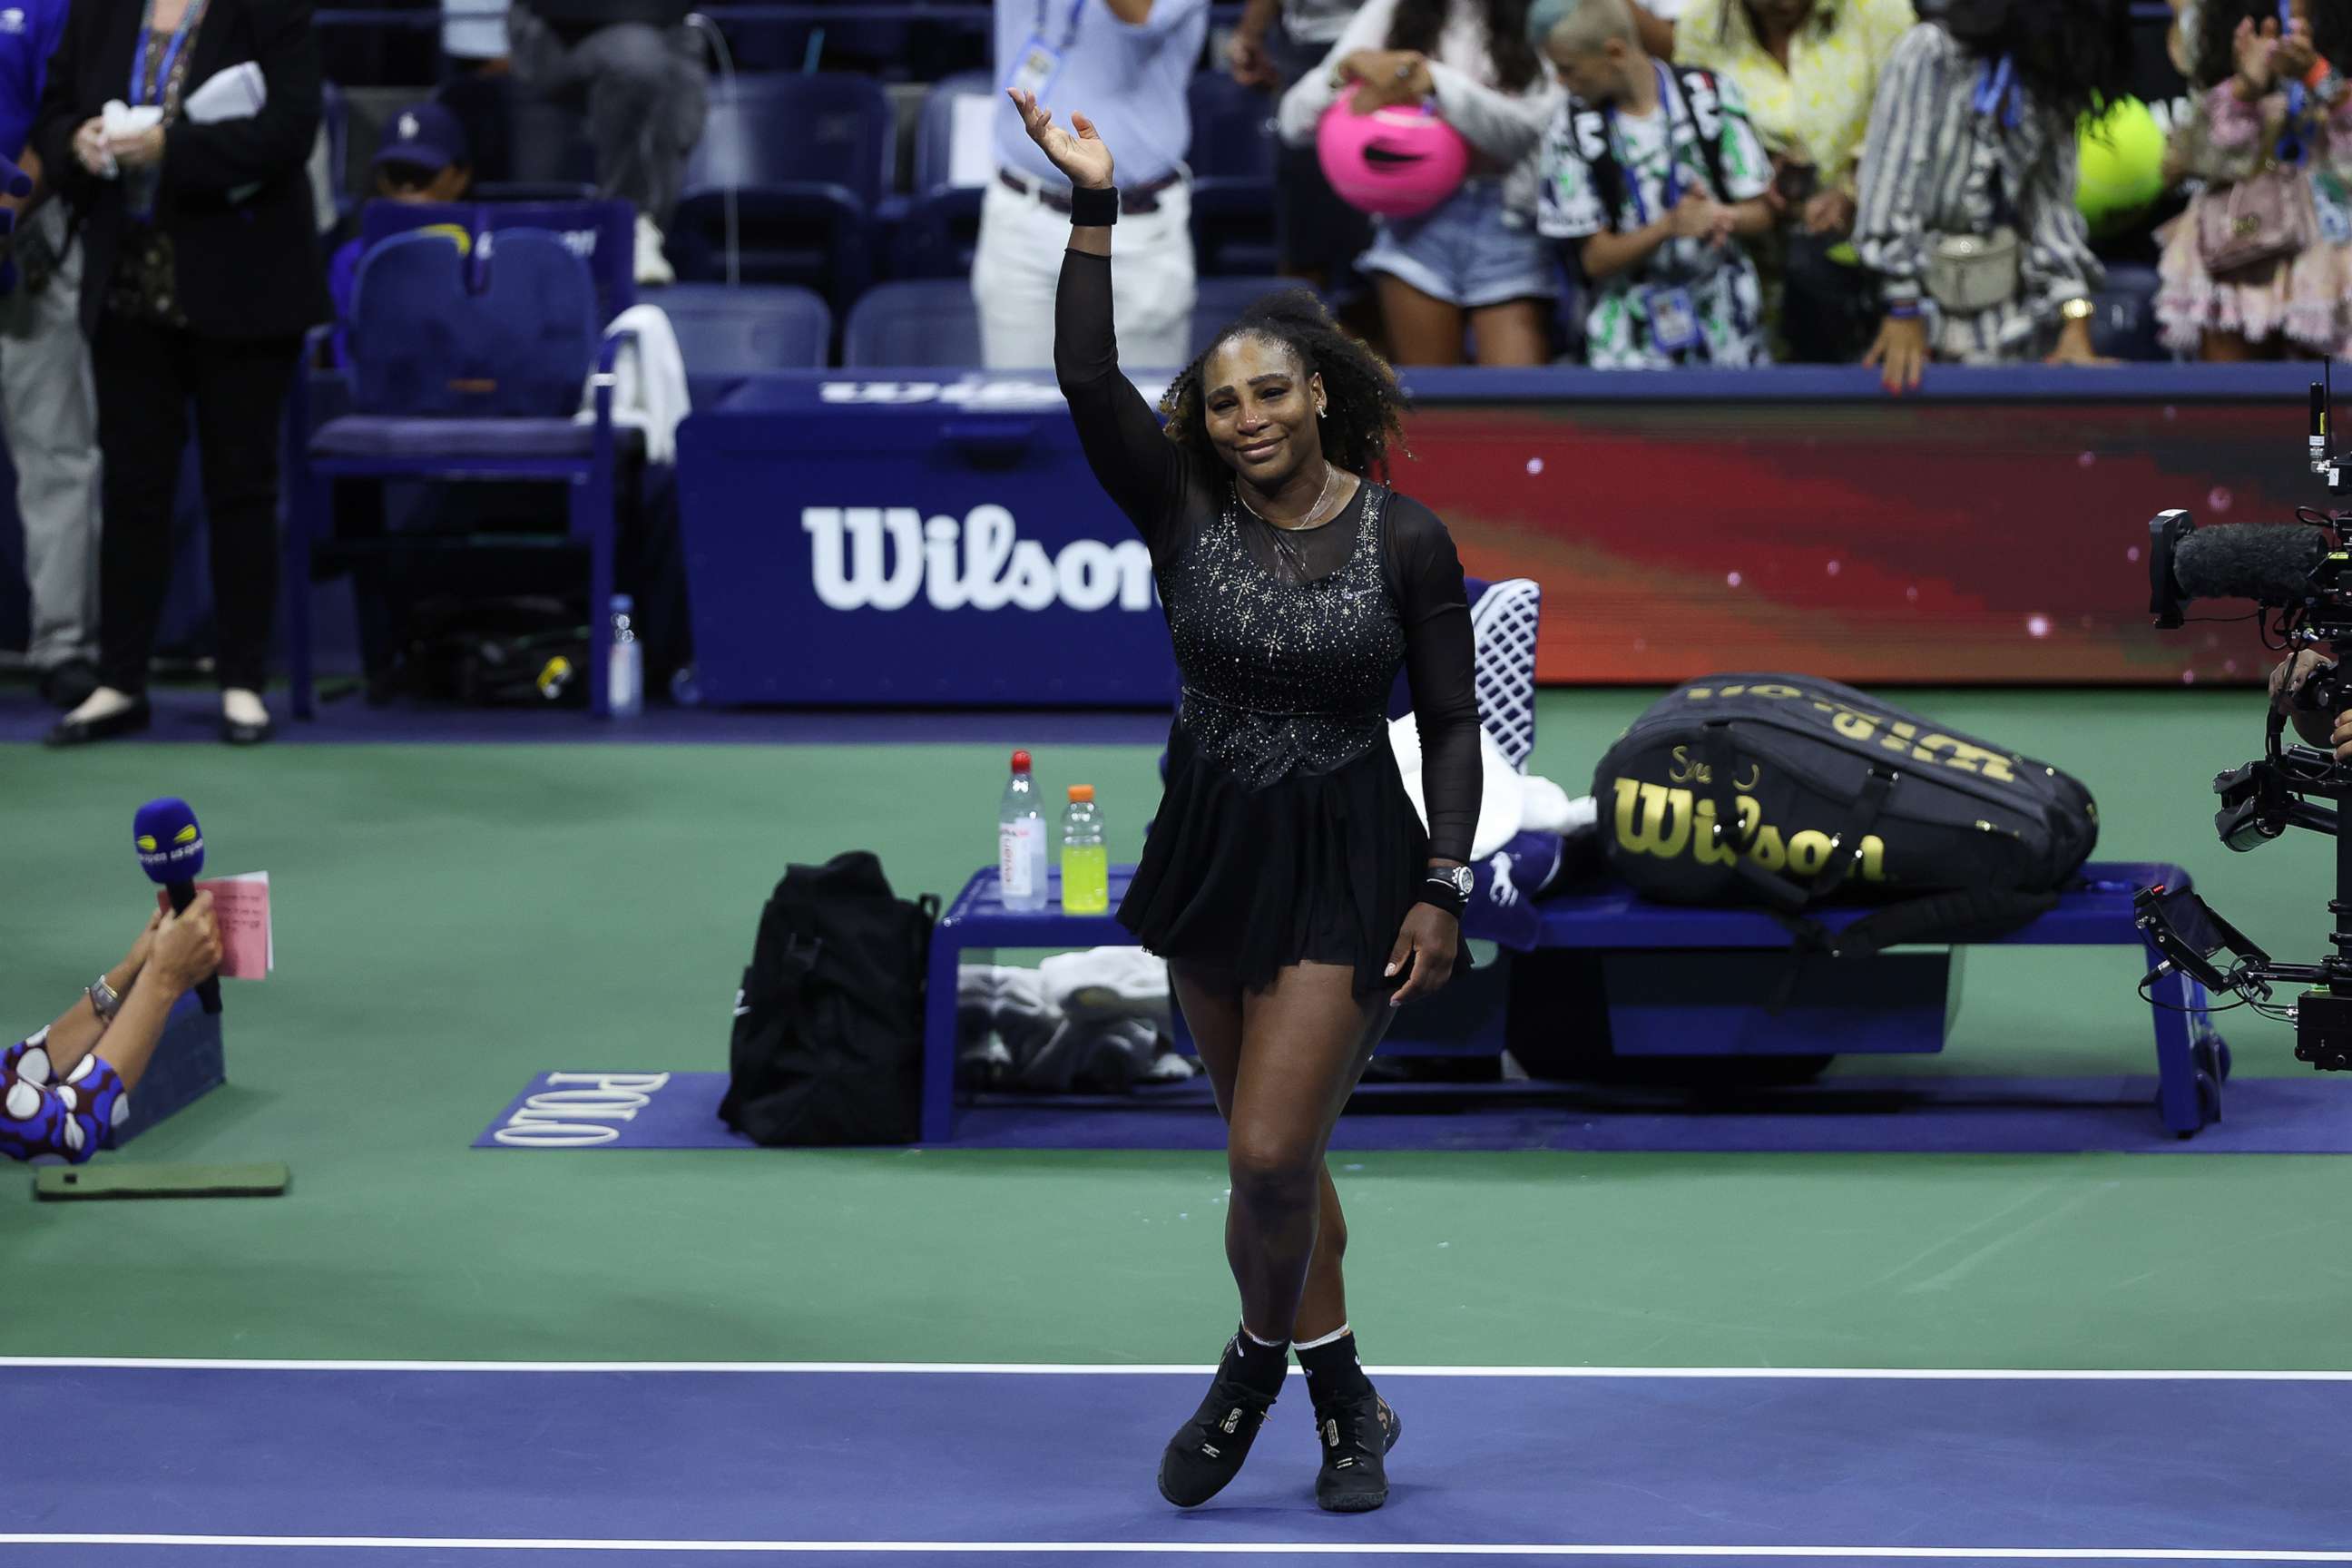 Serena Williams loses at US Open, likely ends professional career